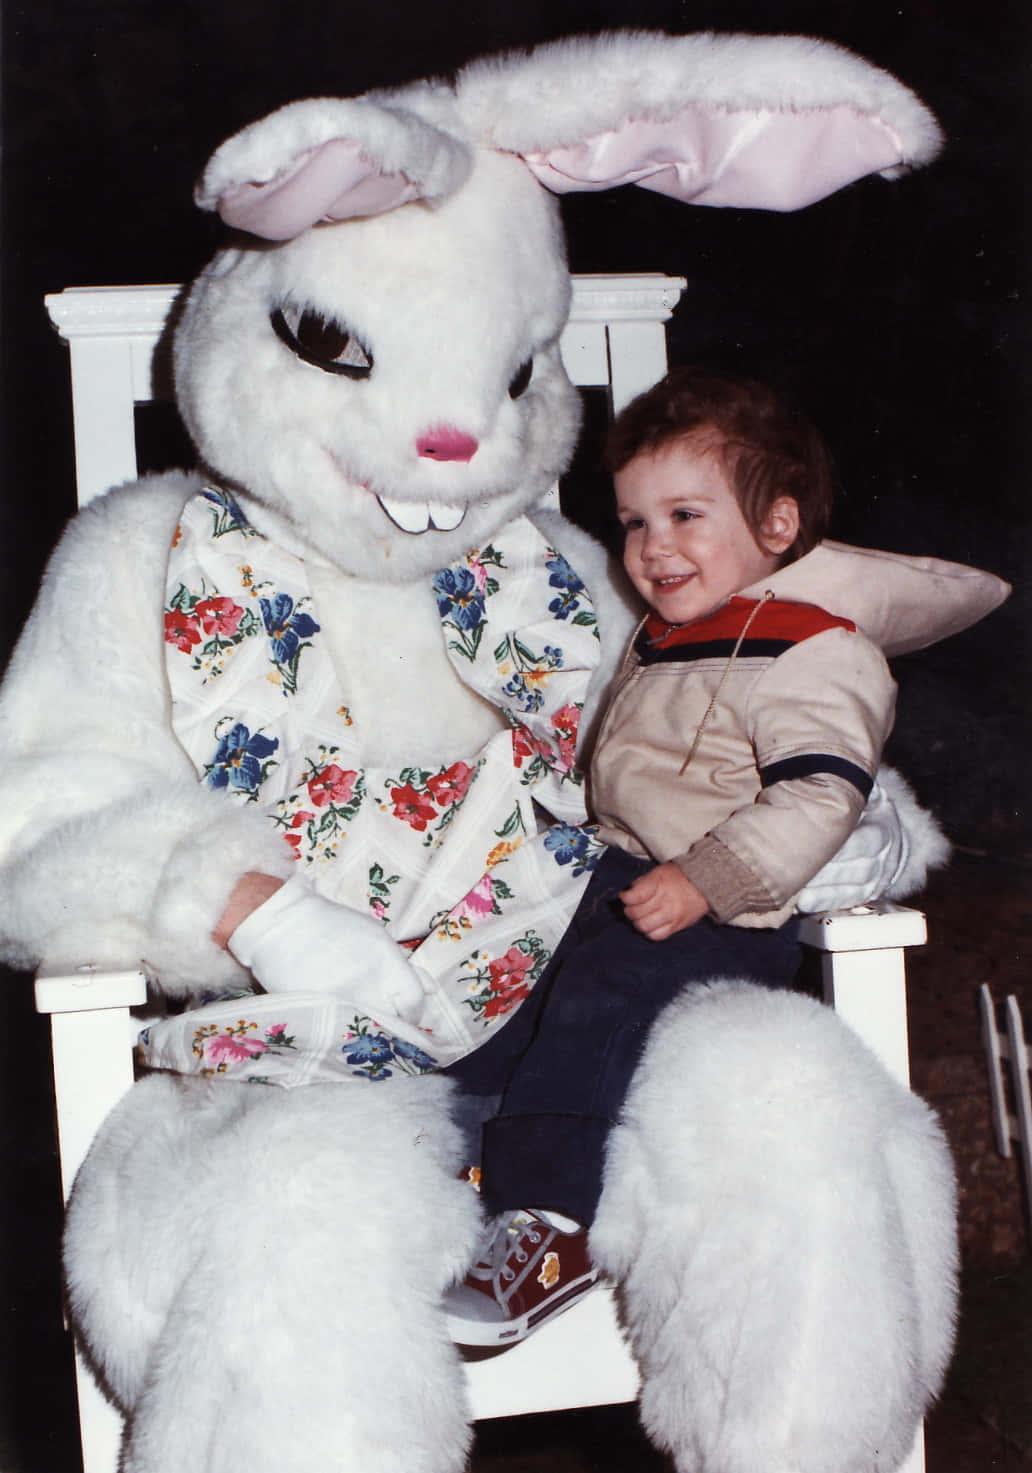 Frightening Easter Bunny Found Lurking in Shadows